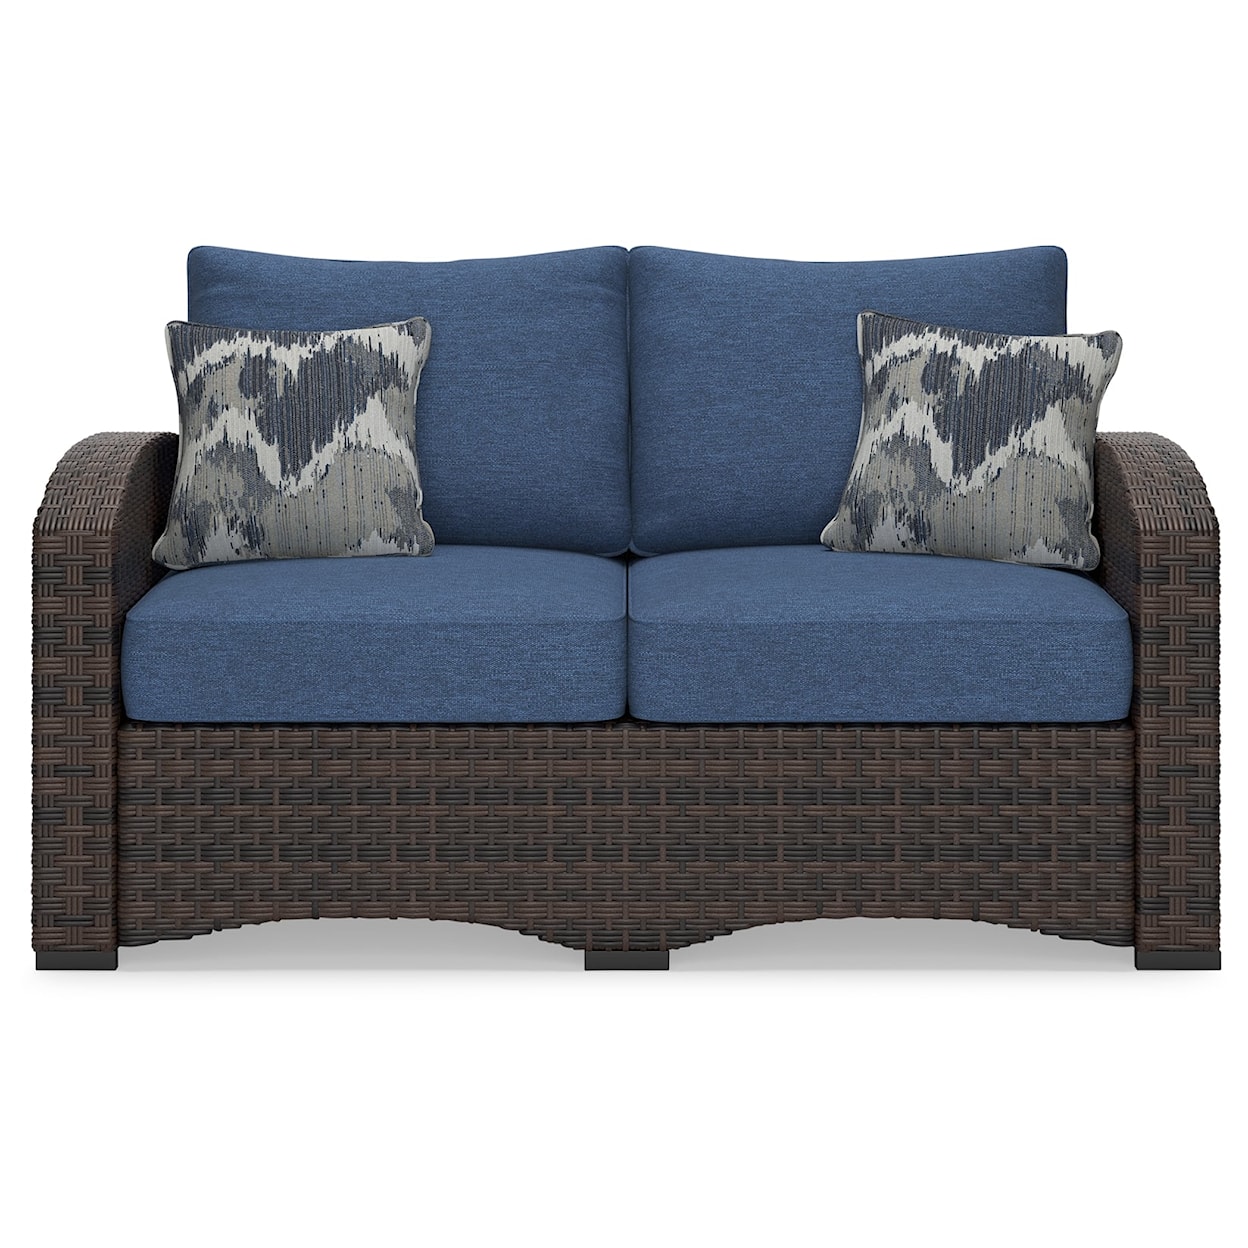 Ashley Furniture Signature Design Windglow Outdoor Loveseat with Cushion